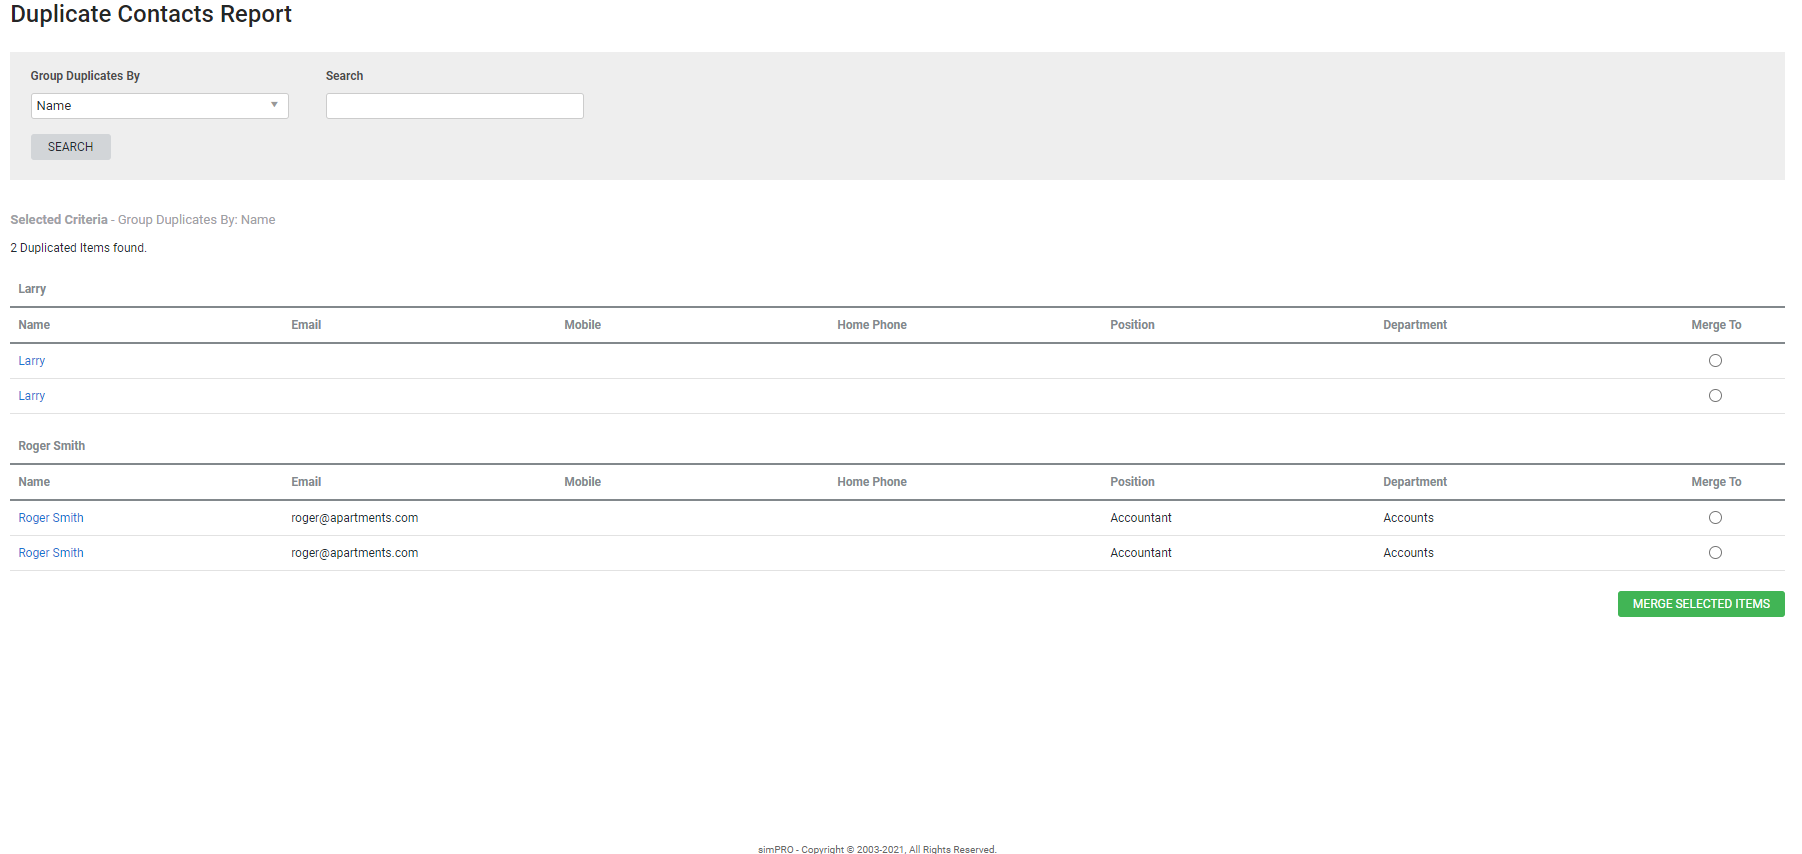 A screenshot of the Duplicate Contacts Report.